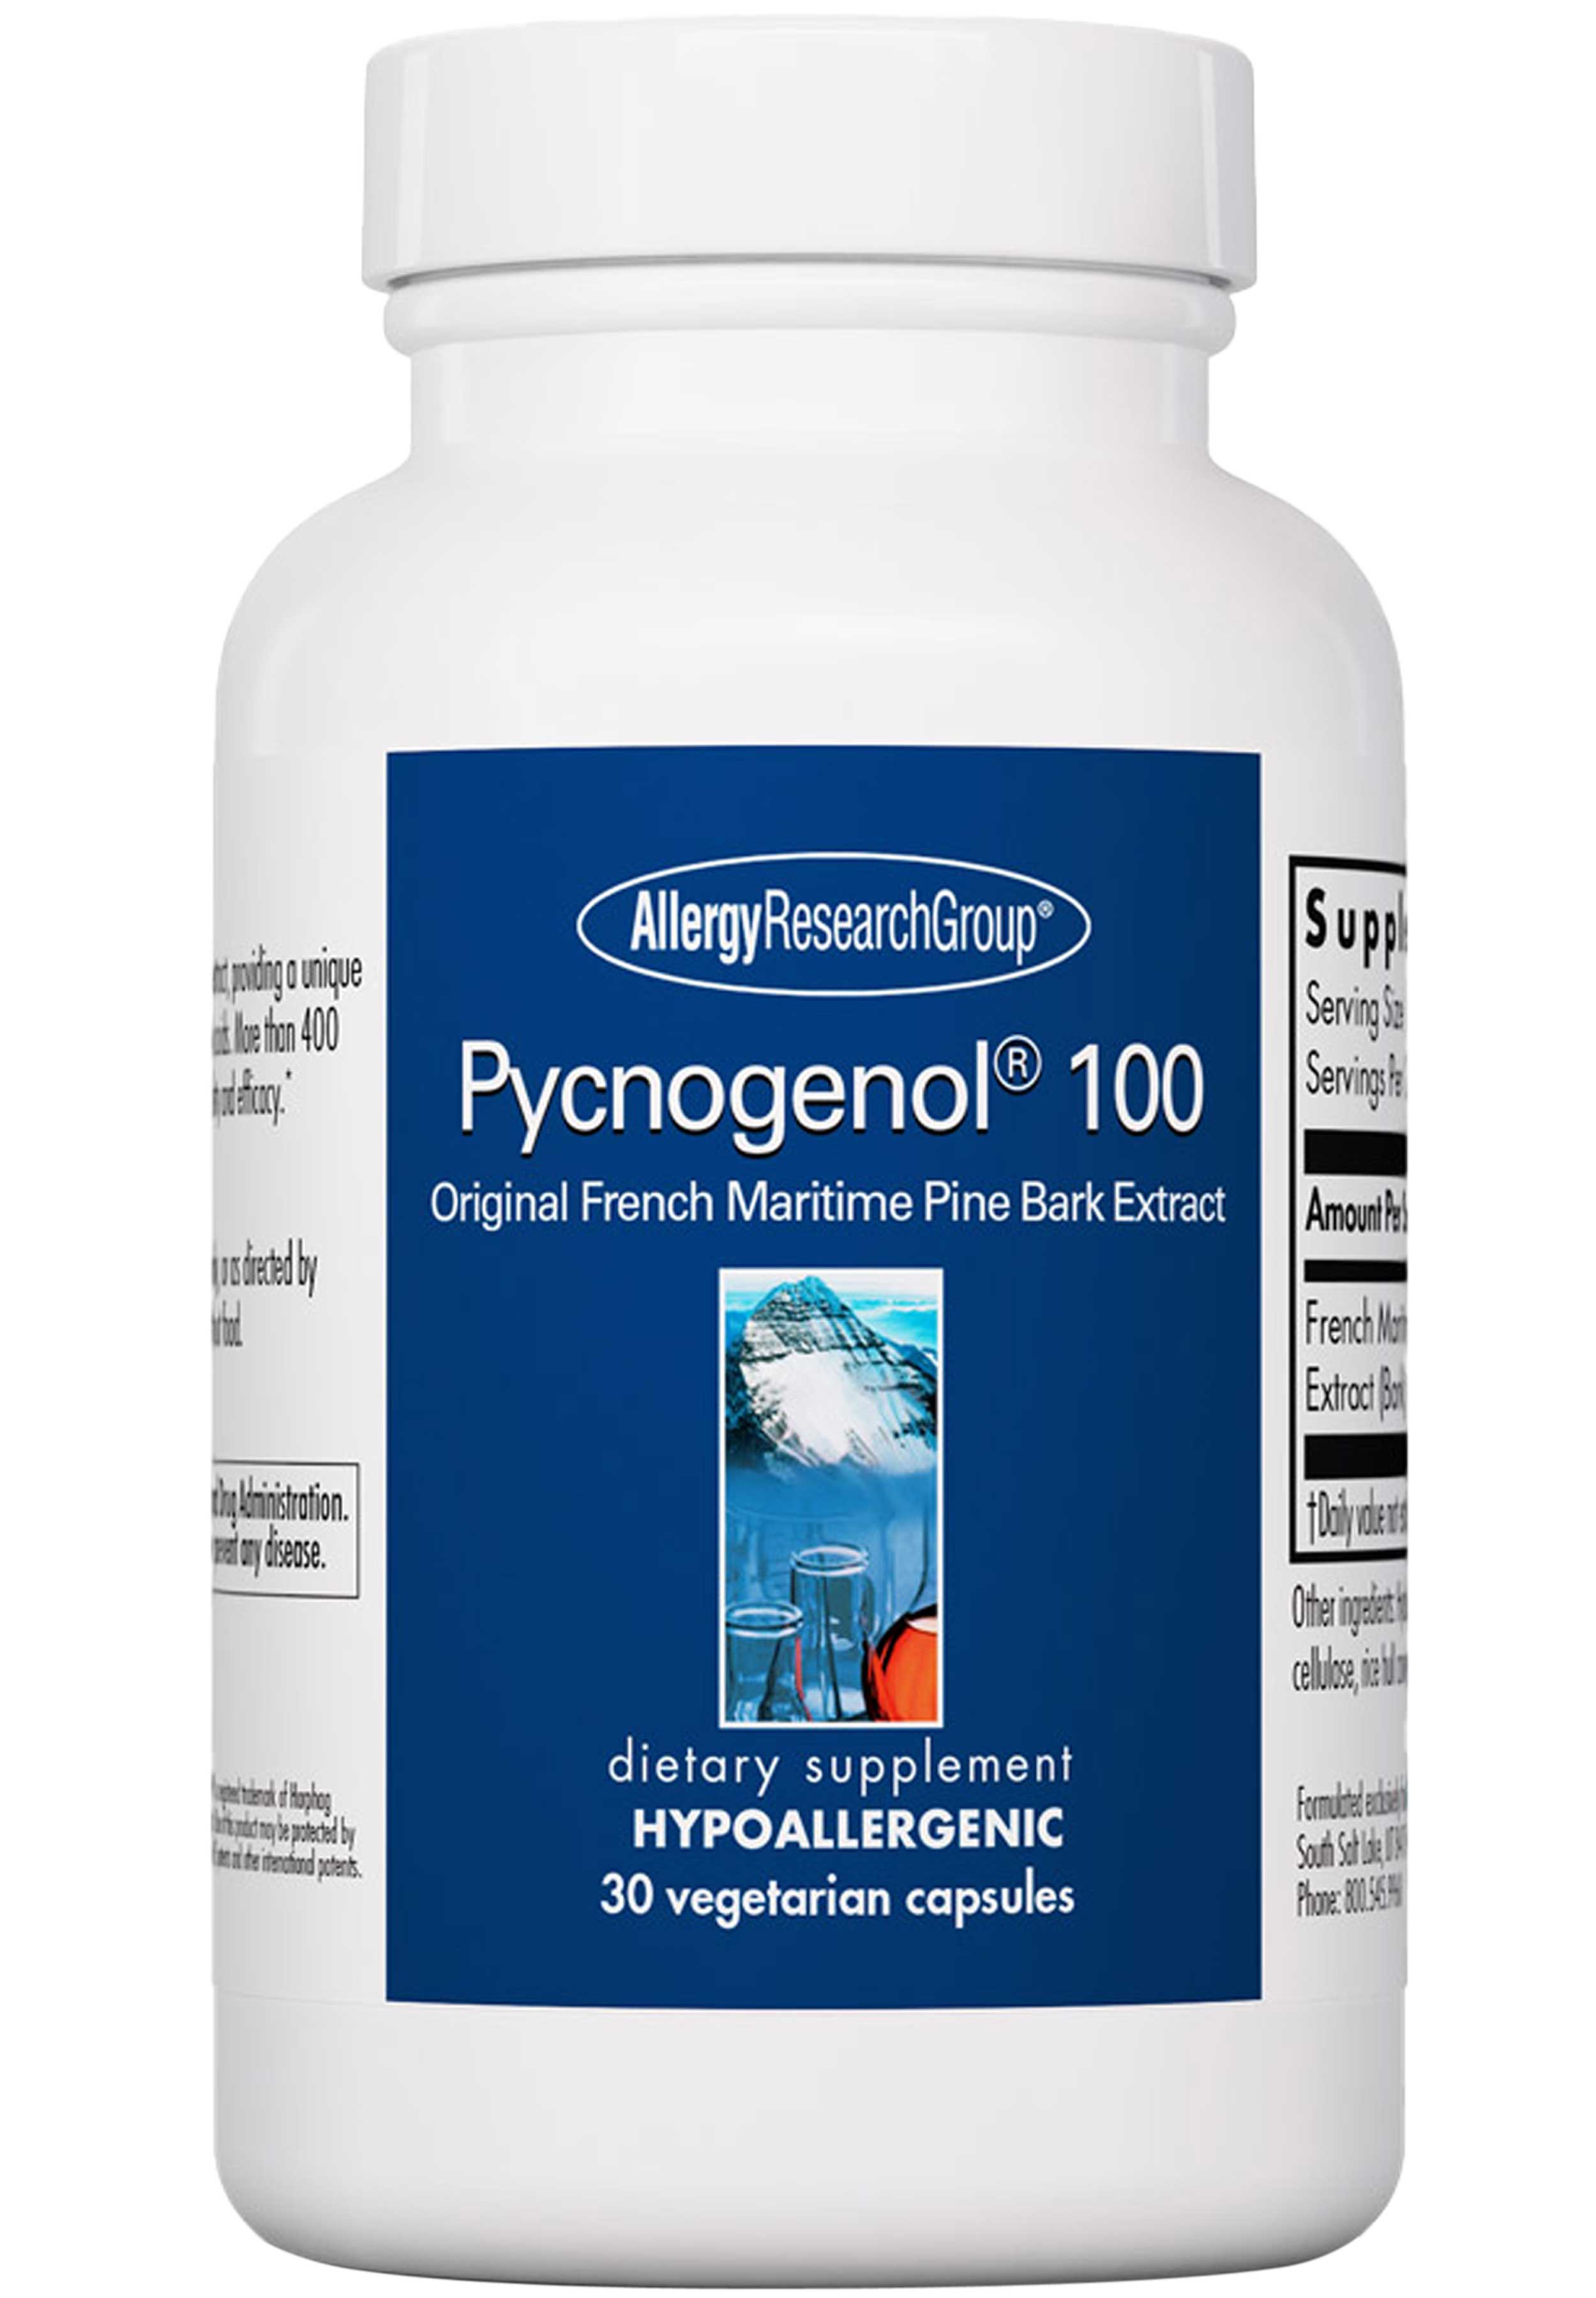 Allergy Research Group Pycnogenol 100